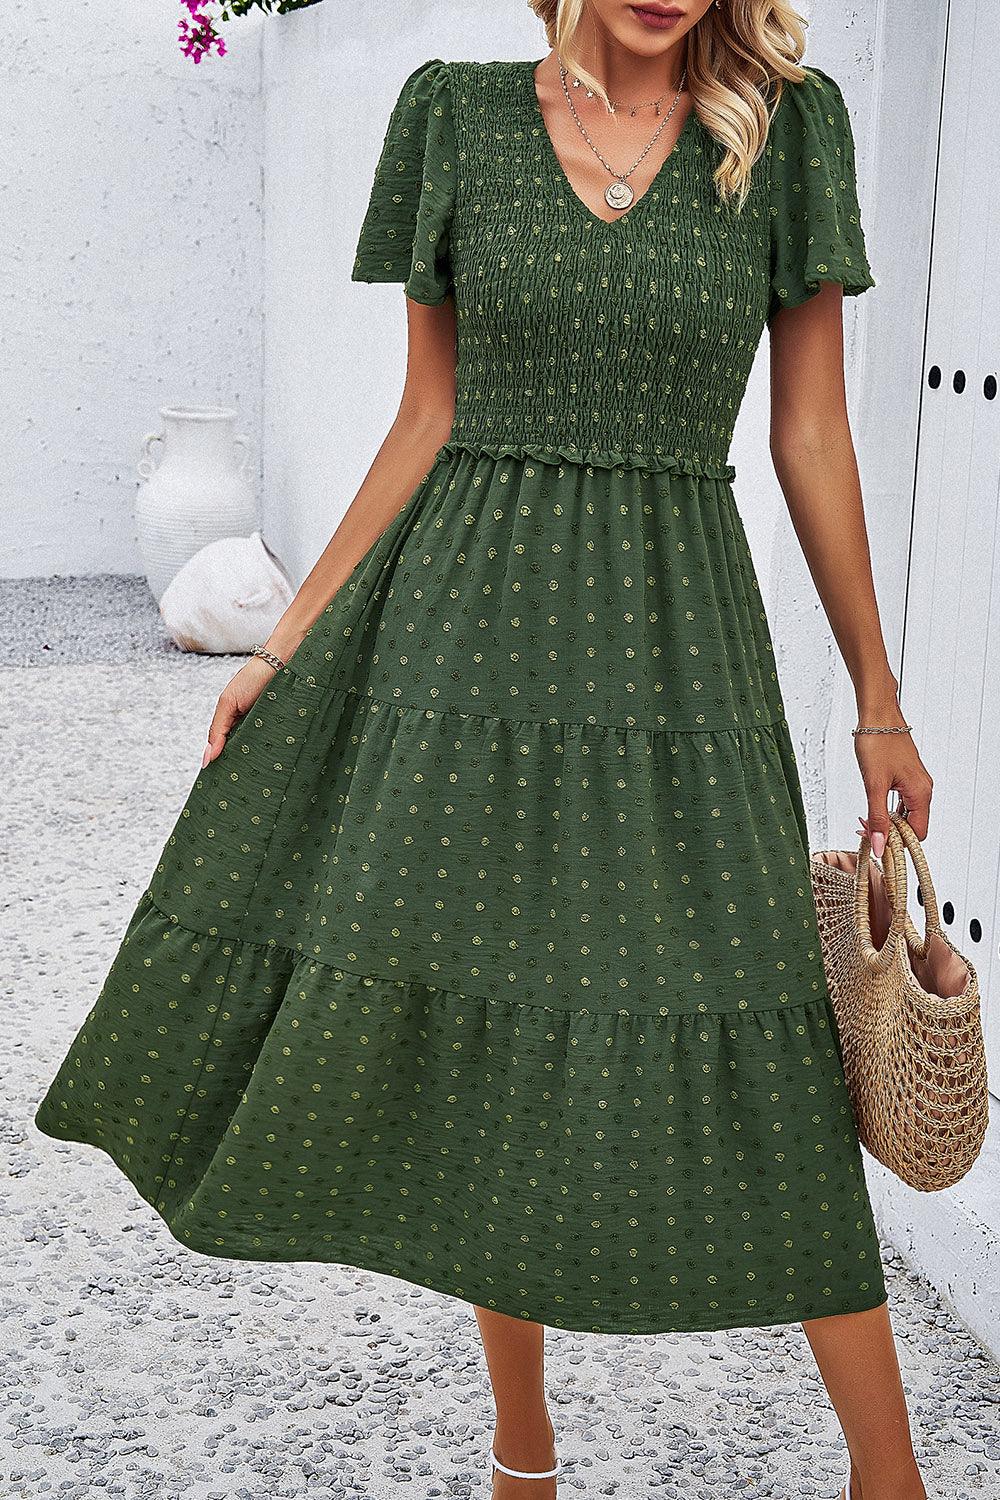 a woman in a green dress holding a straw bag